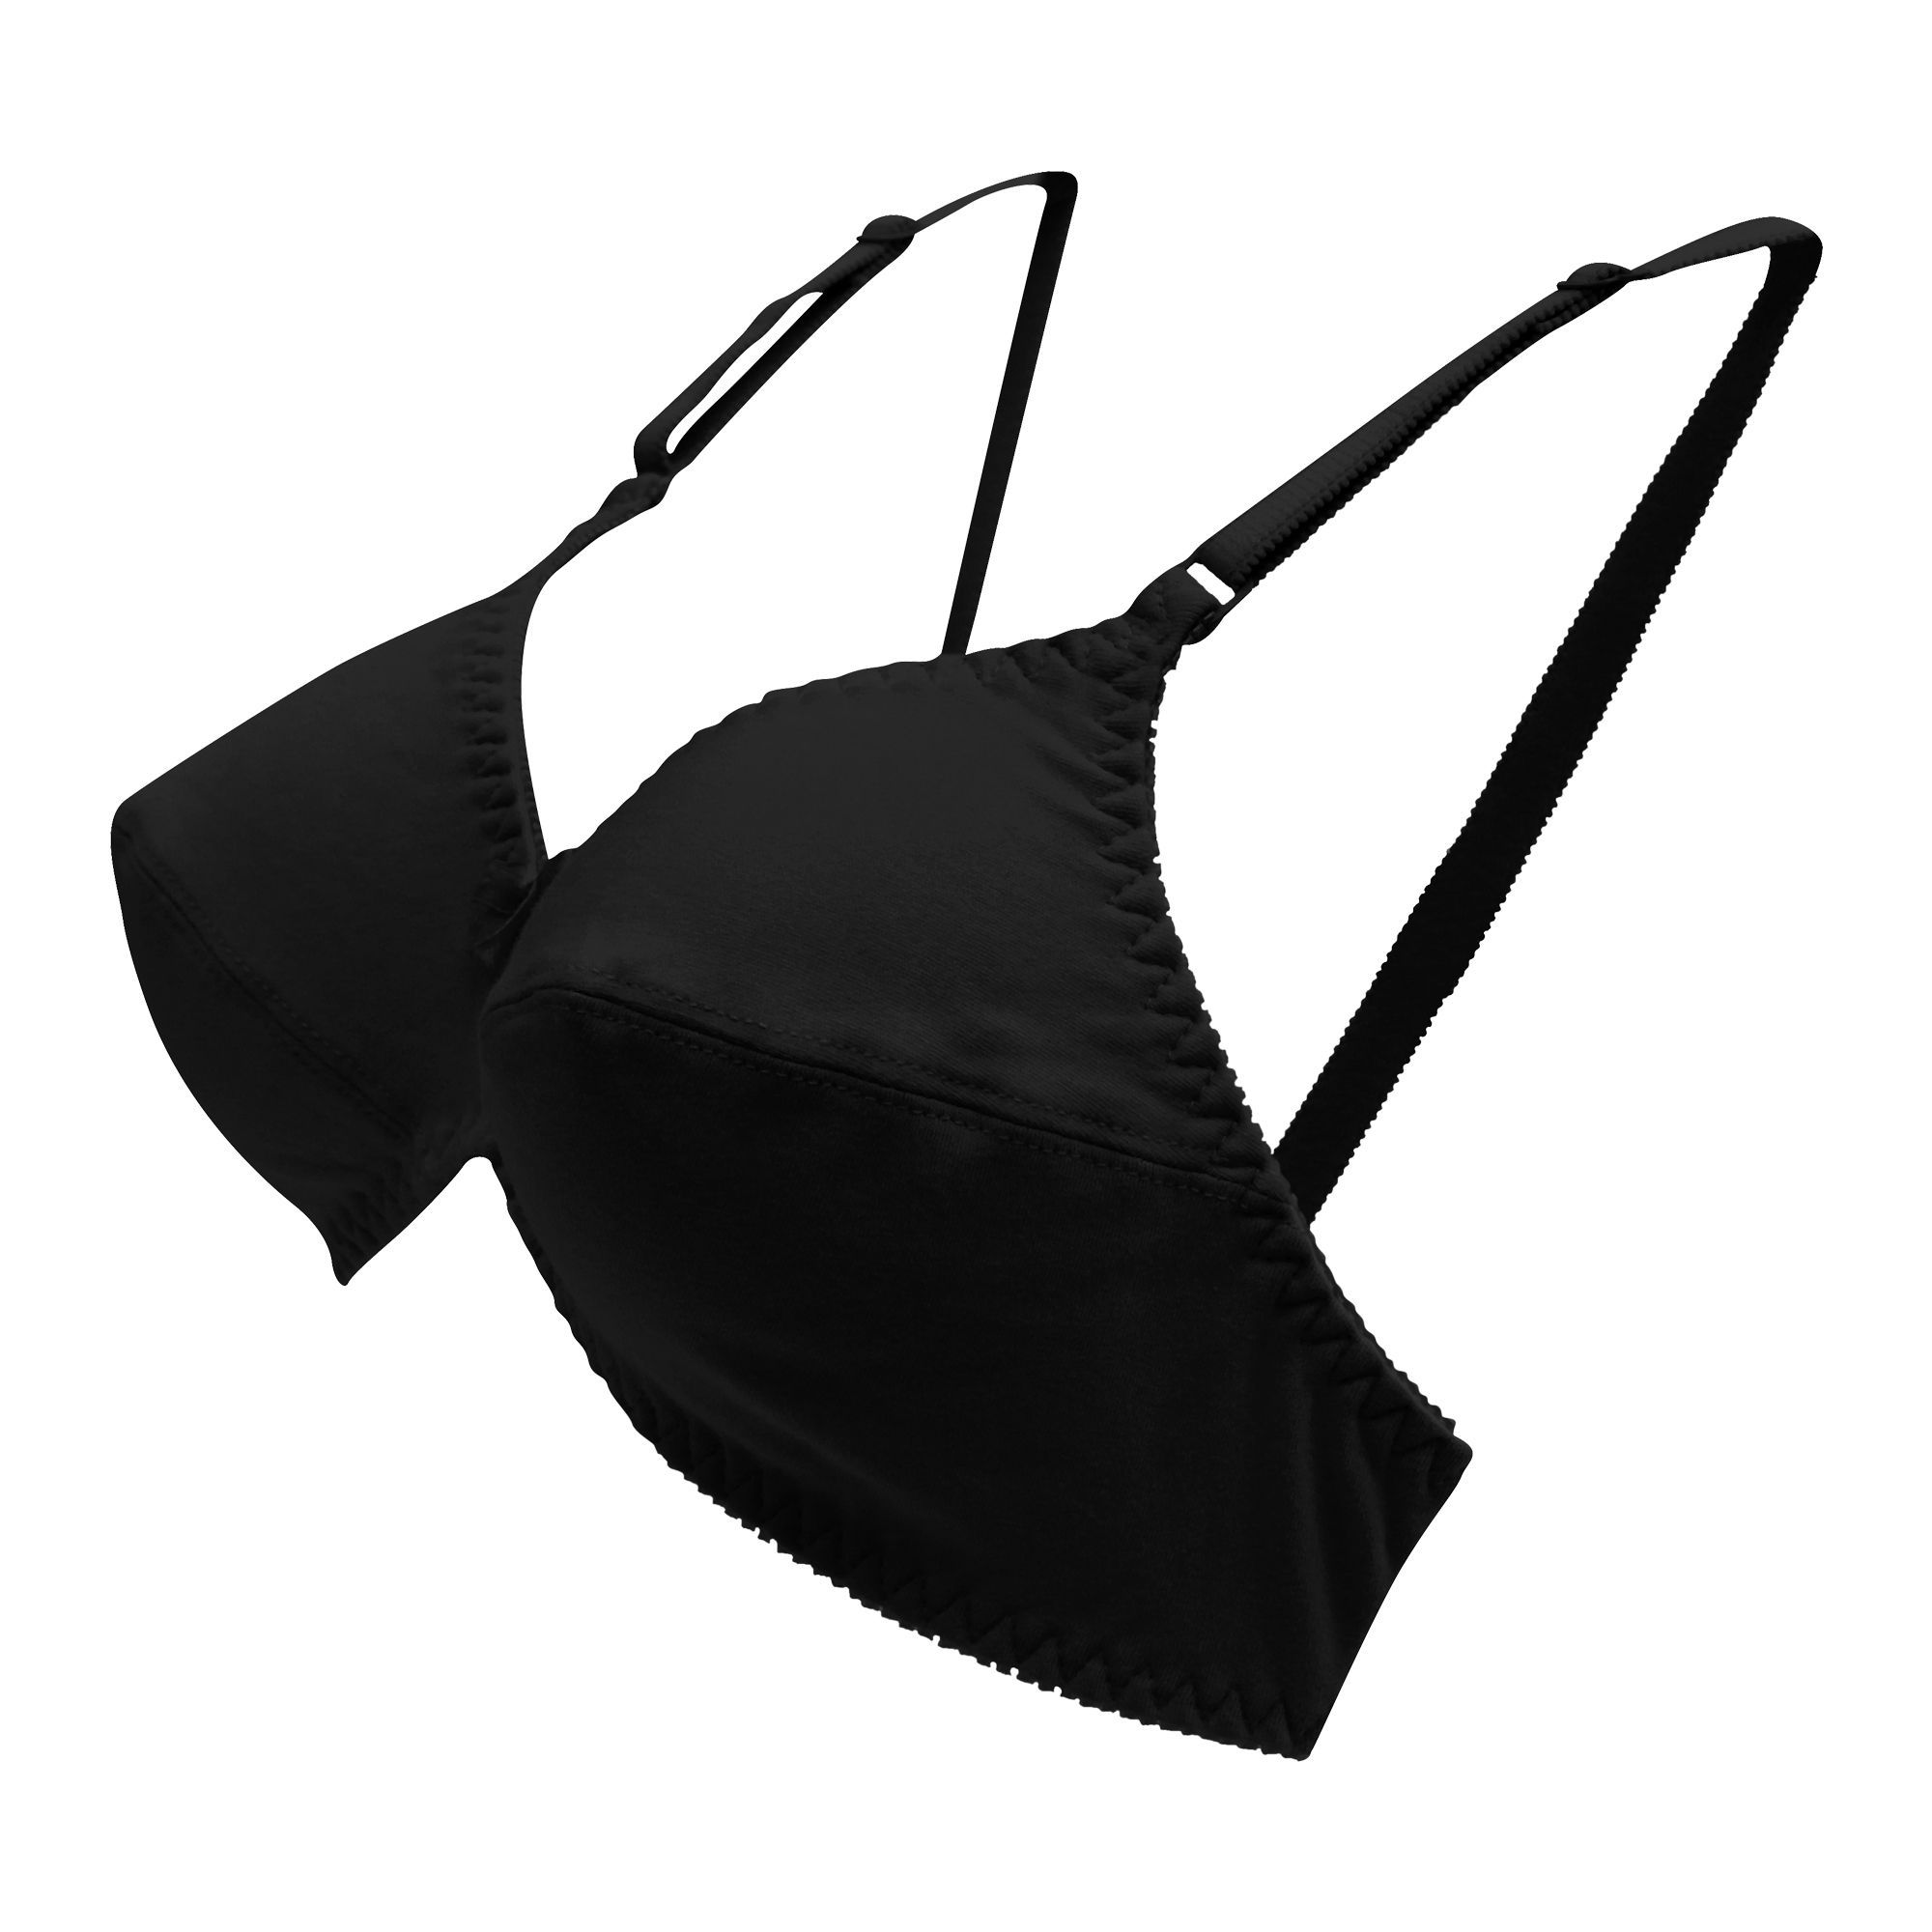 Buy IFG Classic Deluxe Soft Bra, Black Online at Best Price in Pakistan 